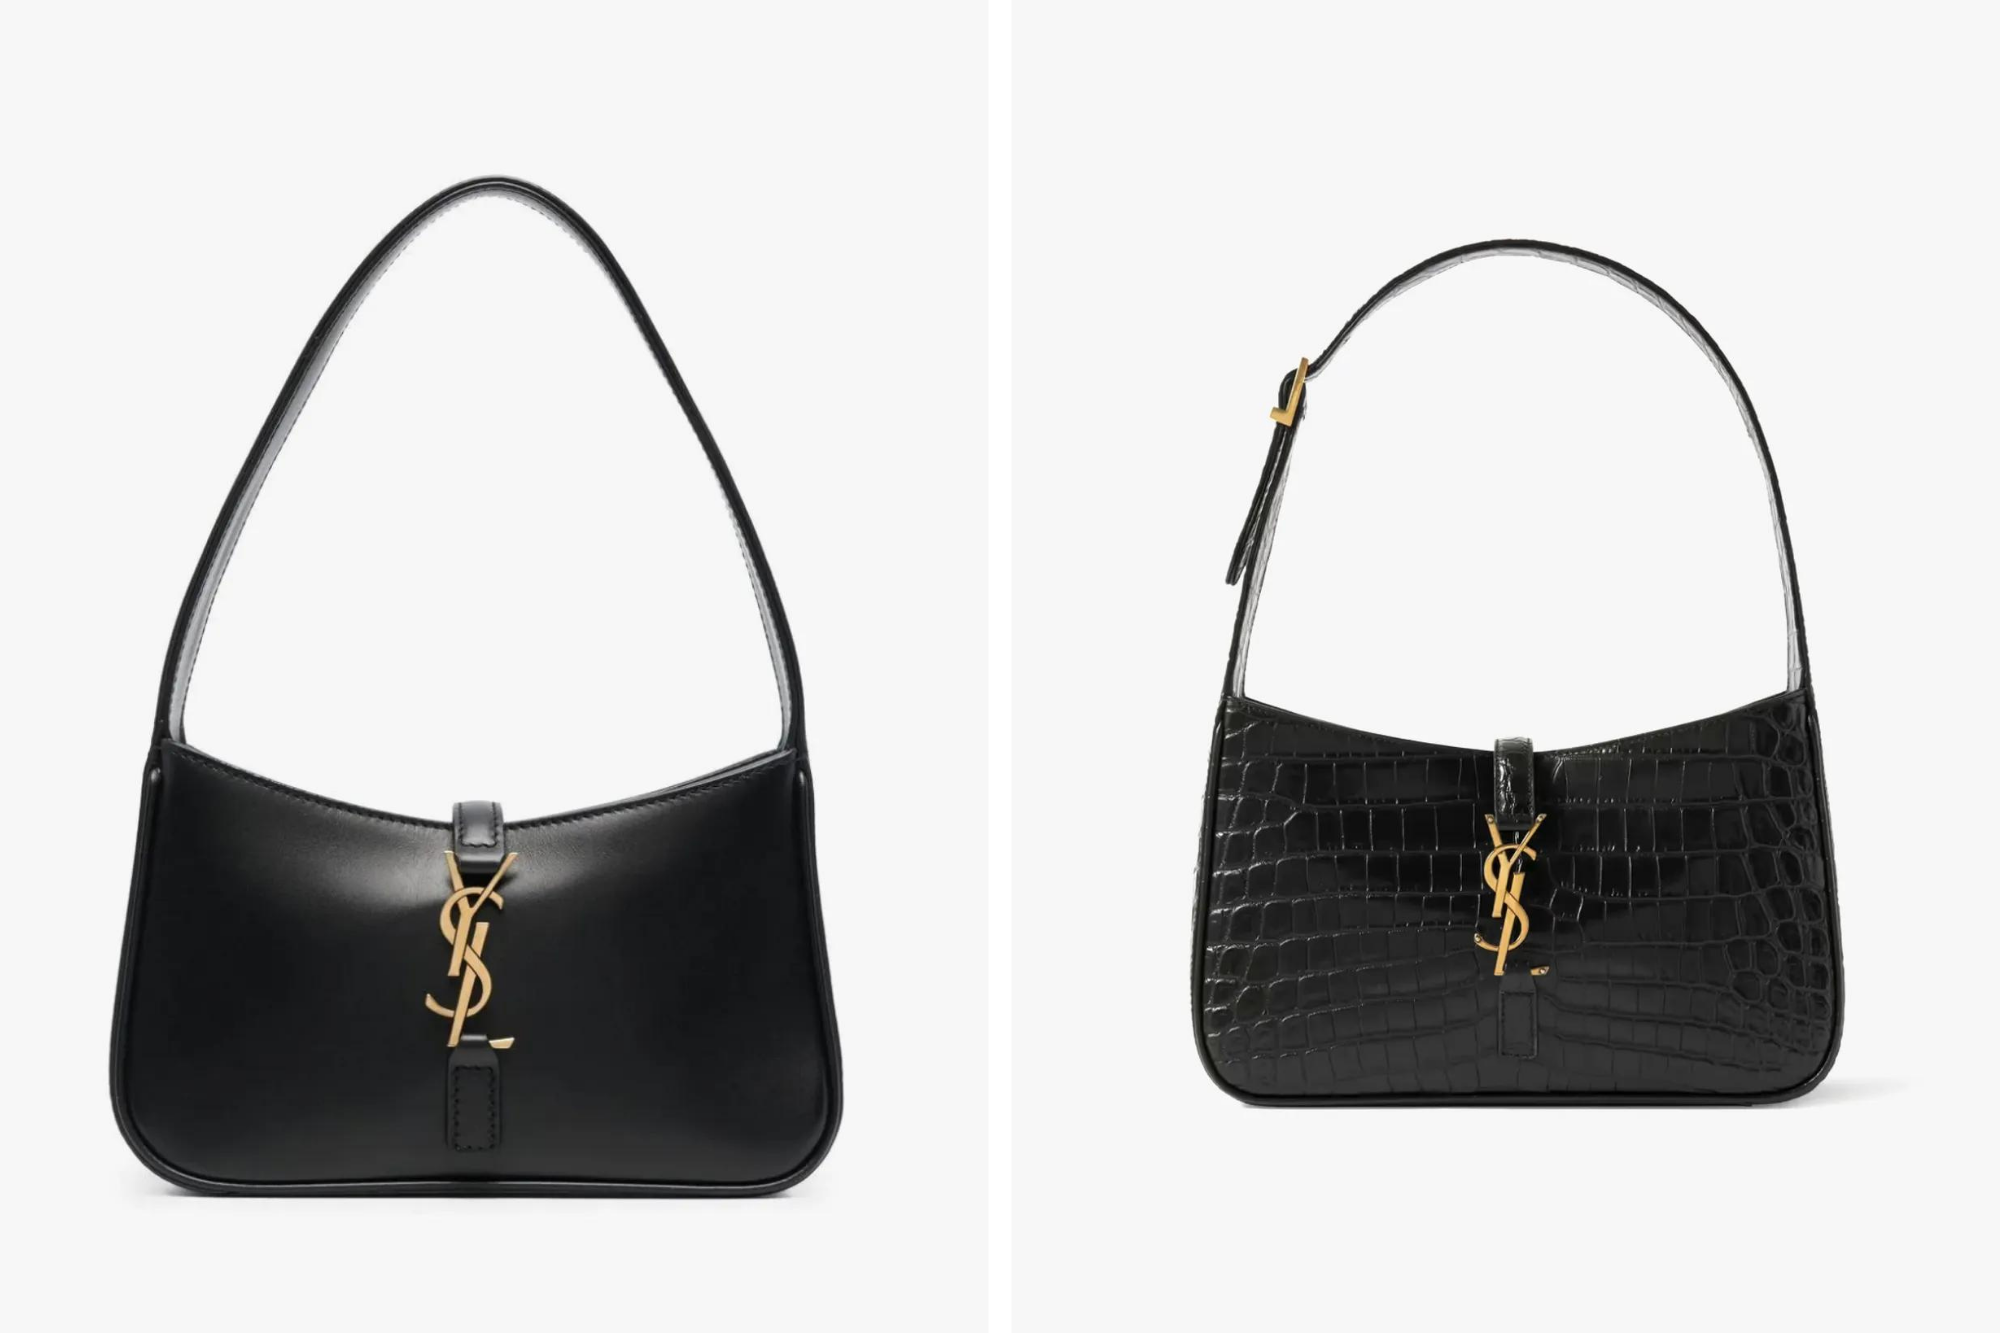 5 Great (LOWKEY) VALUE FOR MONEY LUXURY HANDBAGS to Consider in 2023 